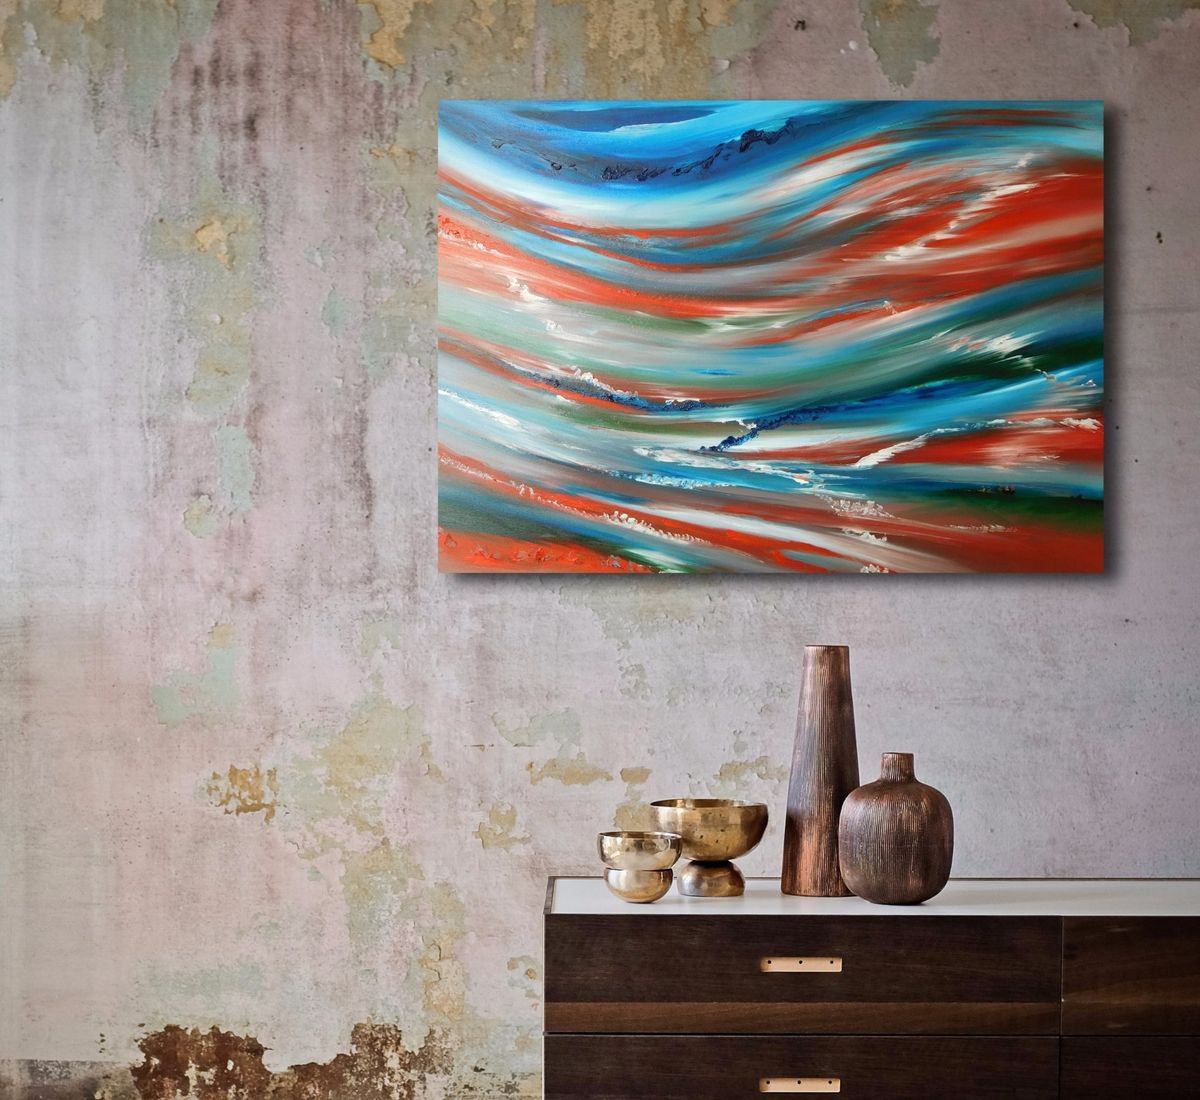 Somewhere, whenever - 70x50 cm, Original abstract painting, oil on canvas by Davide De Palma